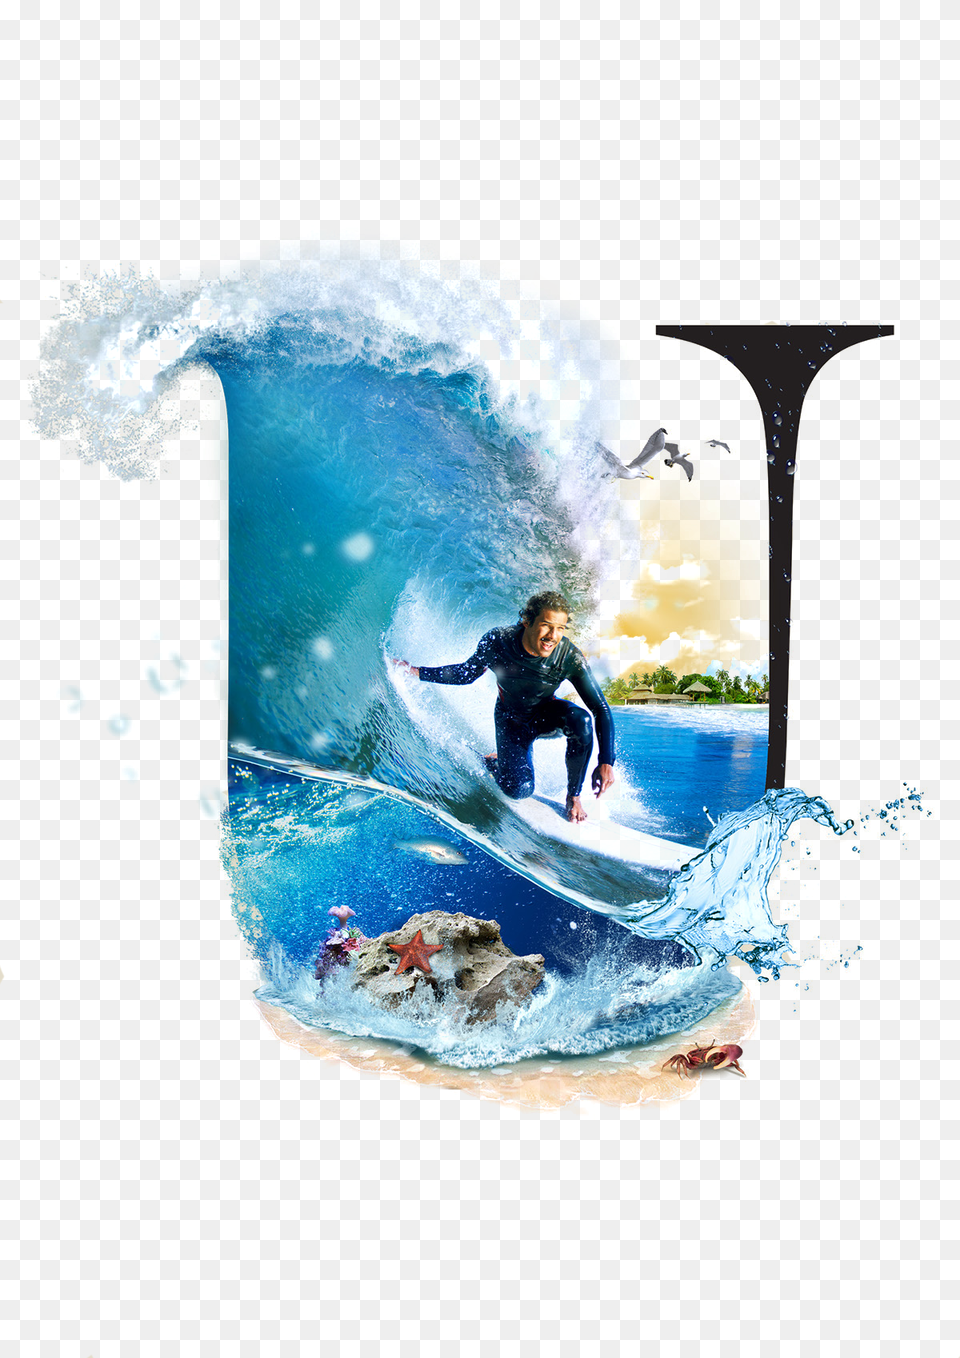 Sea, Water, Surfing, Leisure Activities Png Image